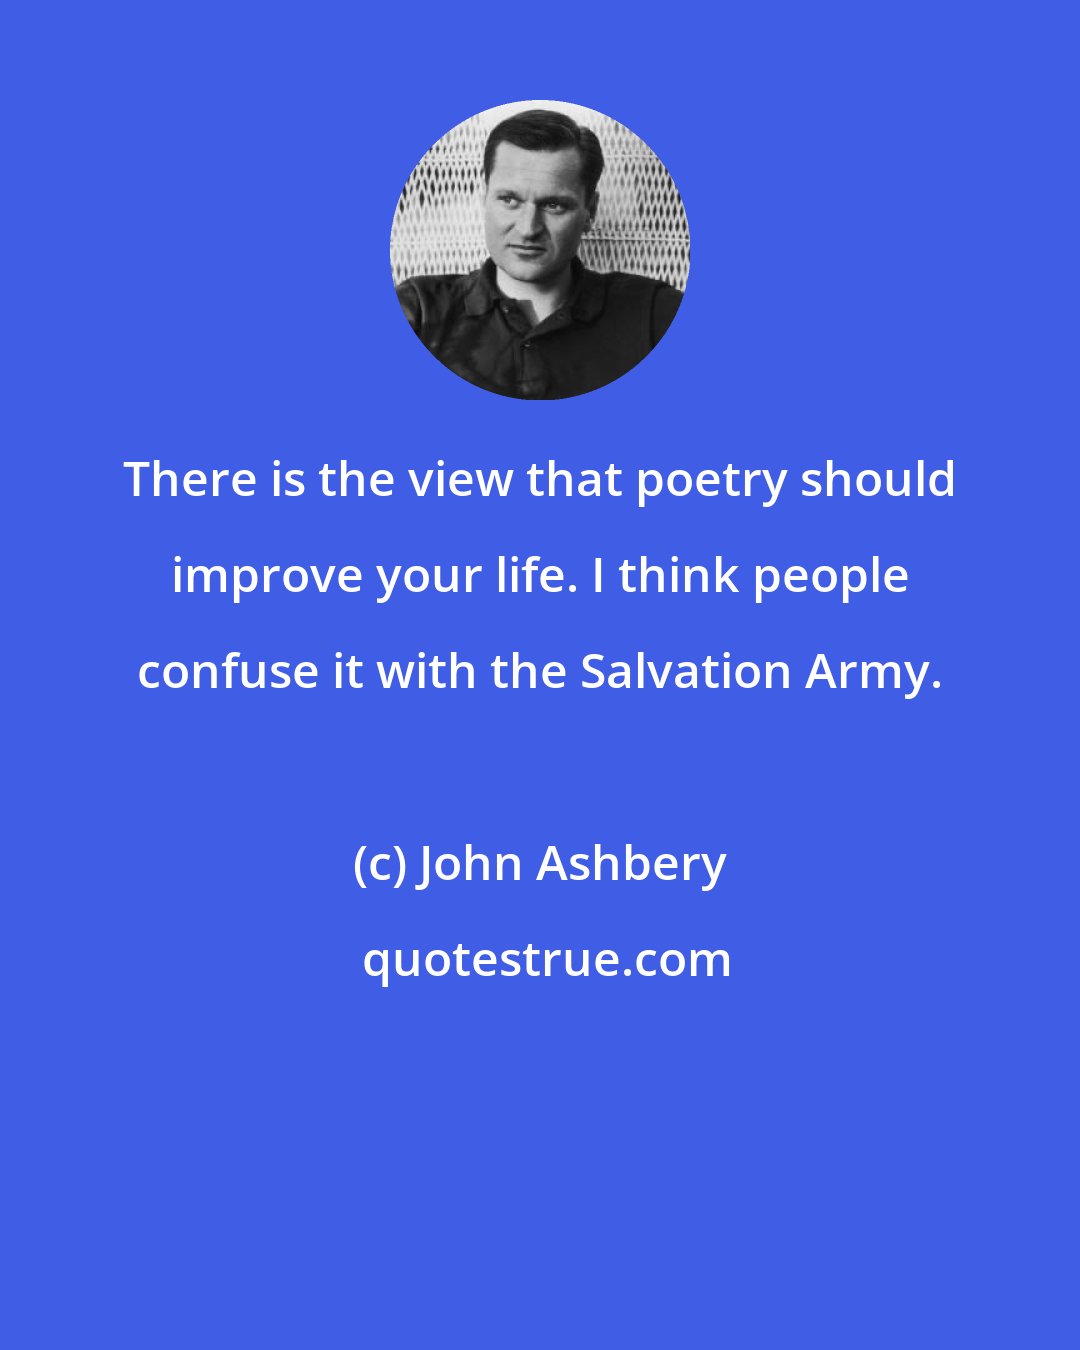 John Ashbery: There is the view that poetry should improve your life. I think people confuse it with the Salvation Army.